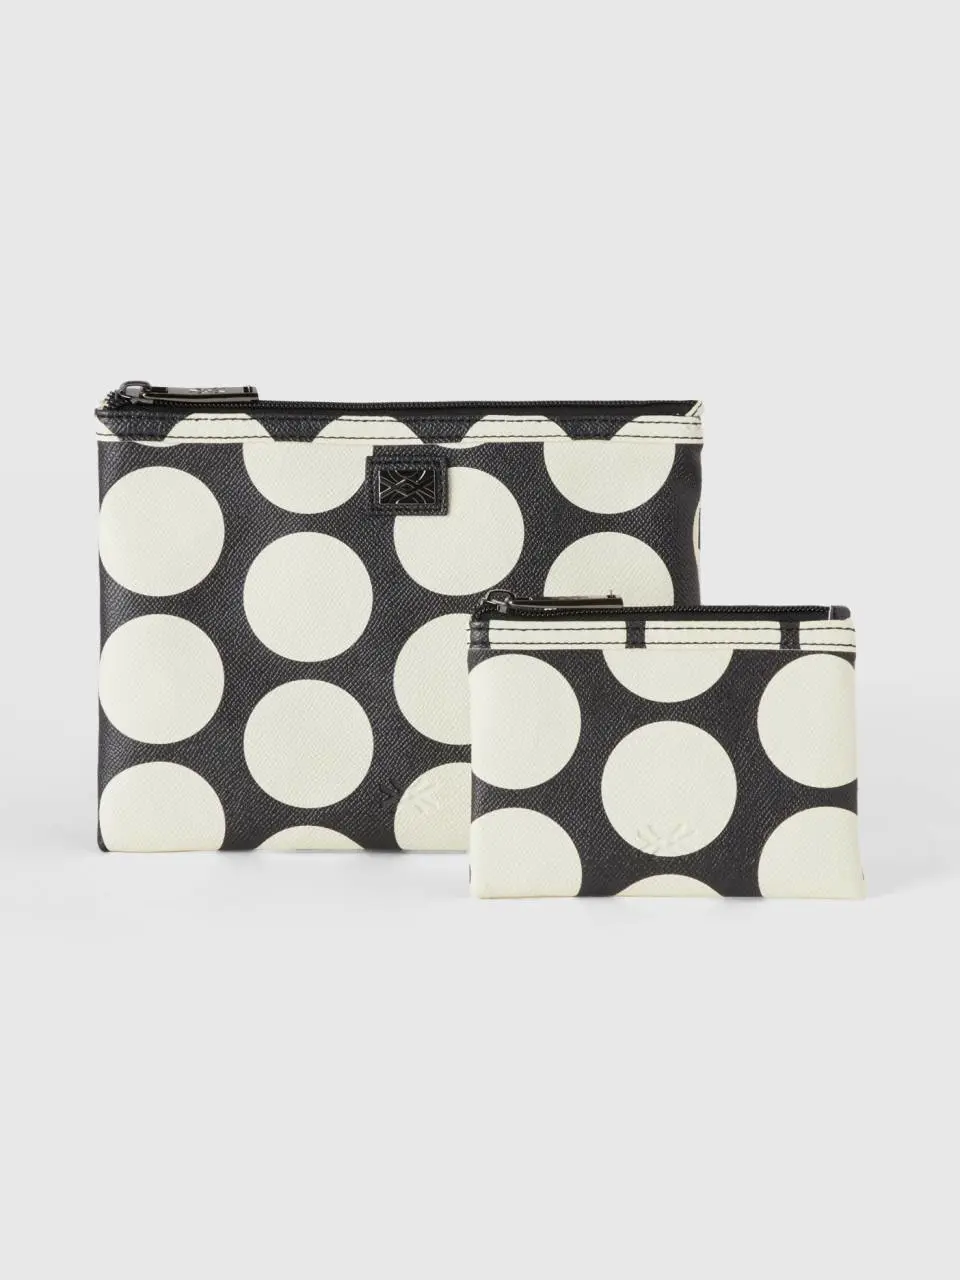 Benetton two black bags with white polka dots. 1